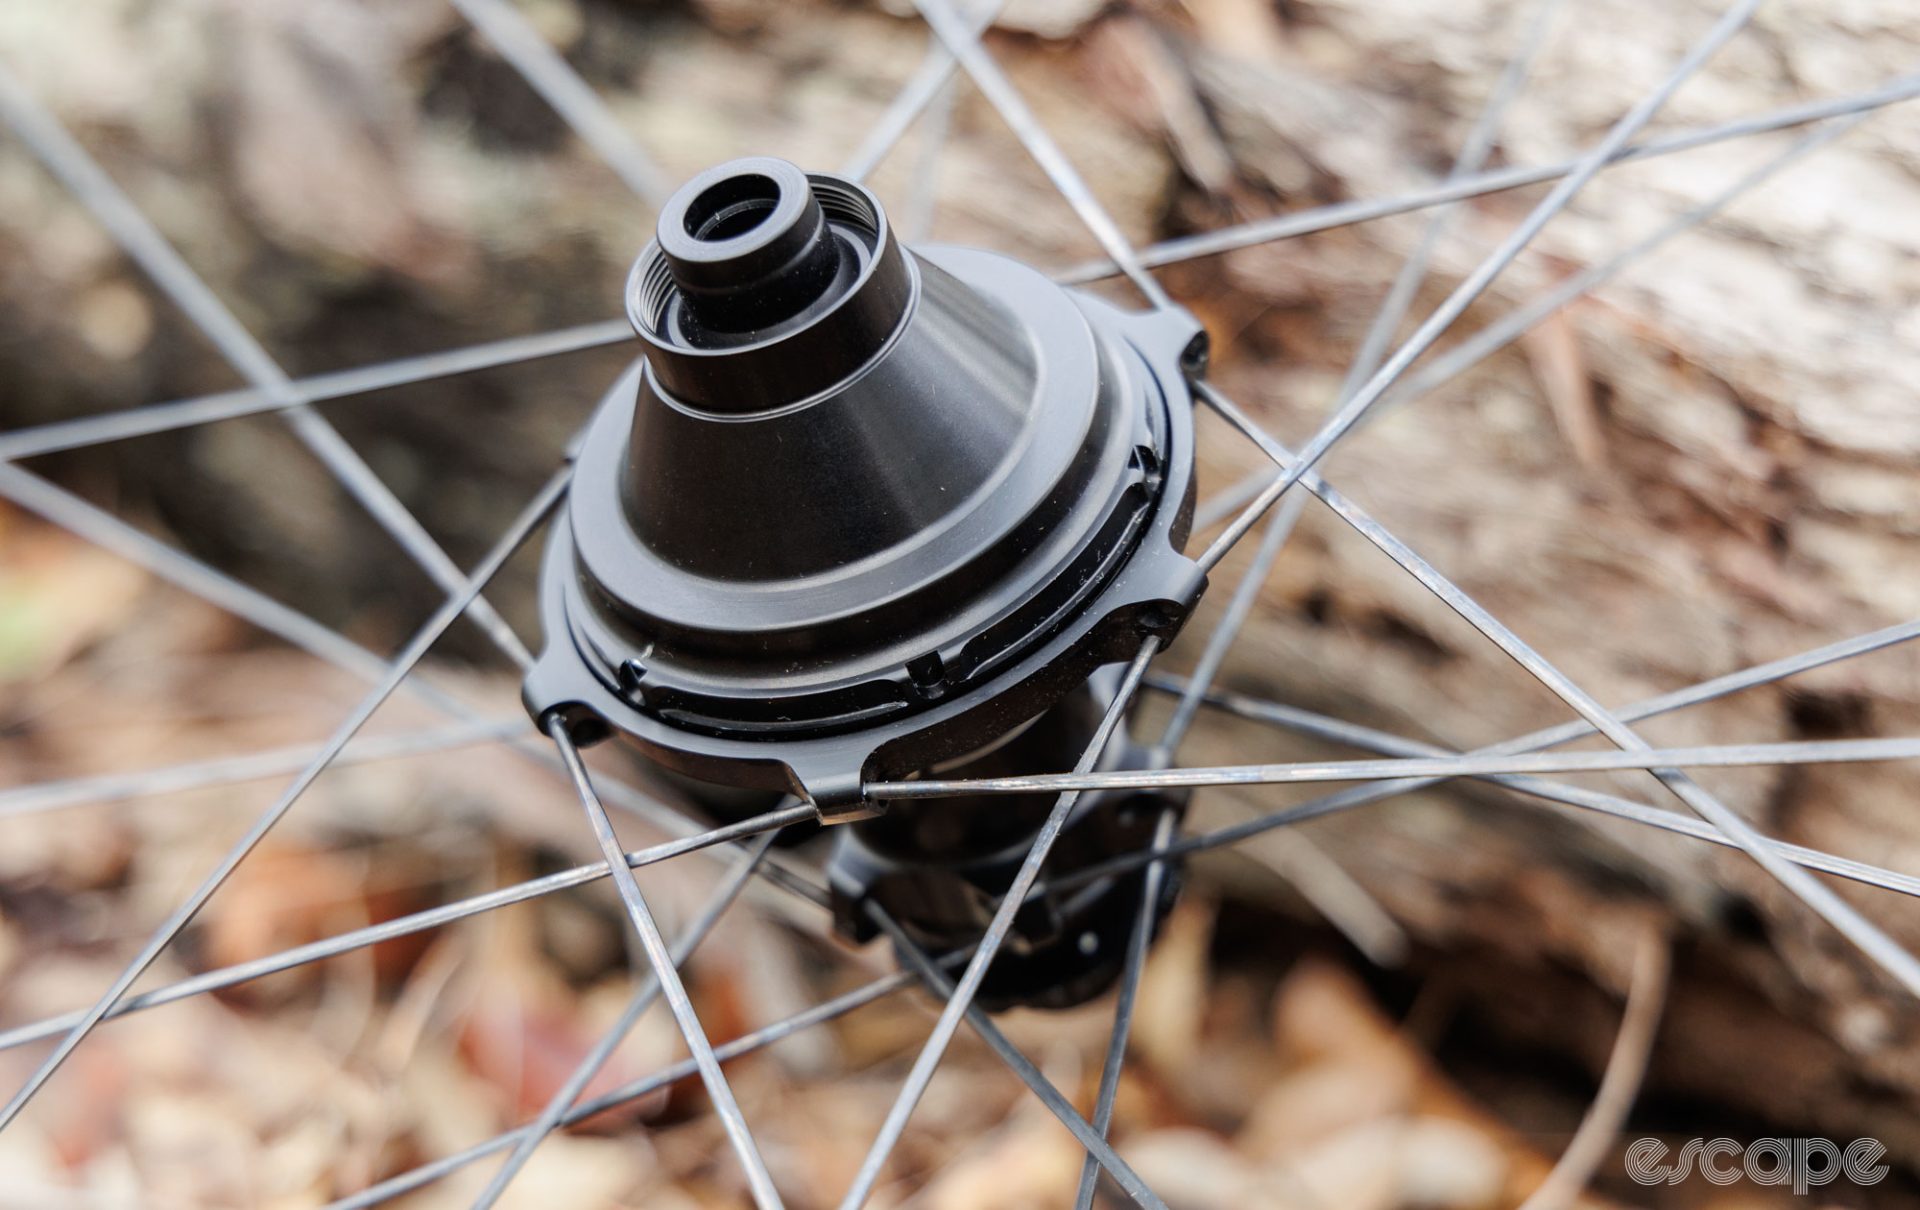 One drawback of the Classified system is that the freehub is tucked inside the smoothly conical hub shell and is not user serviceable. 